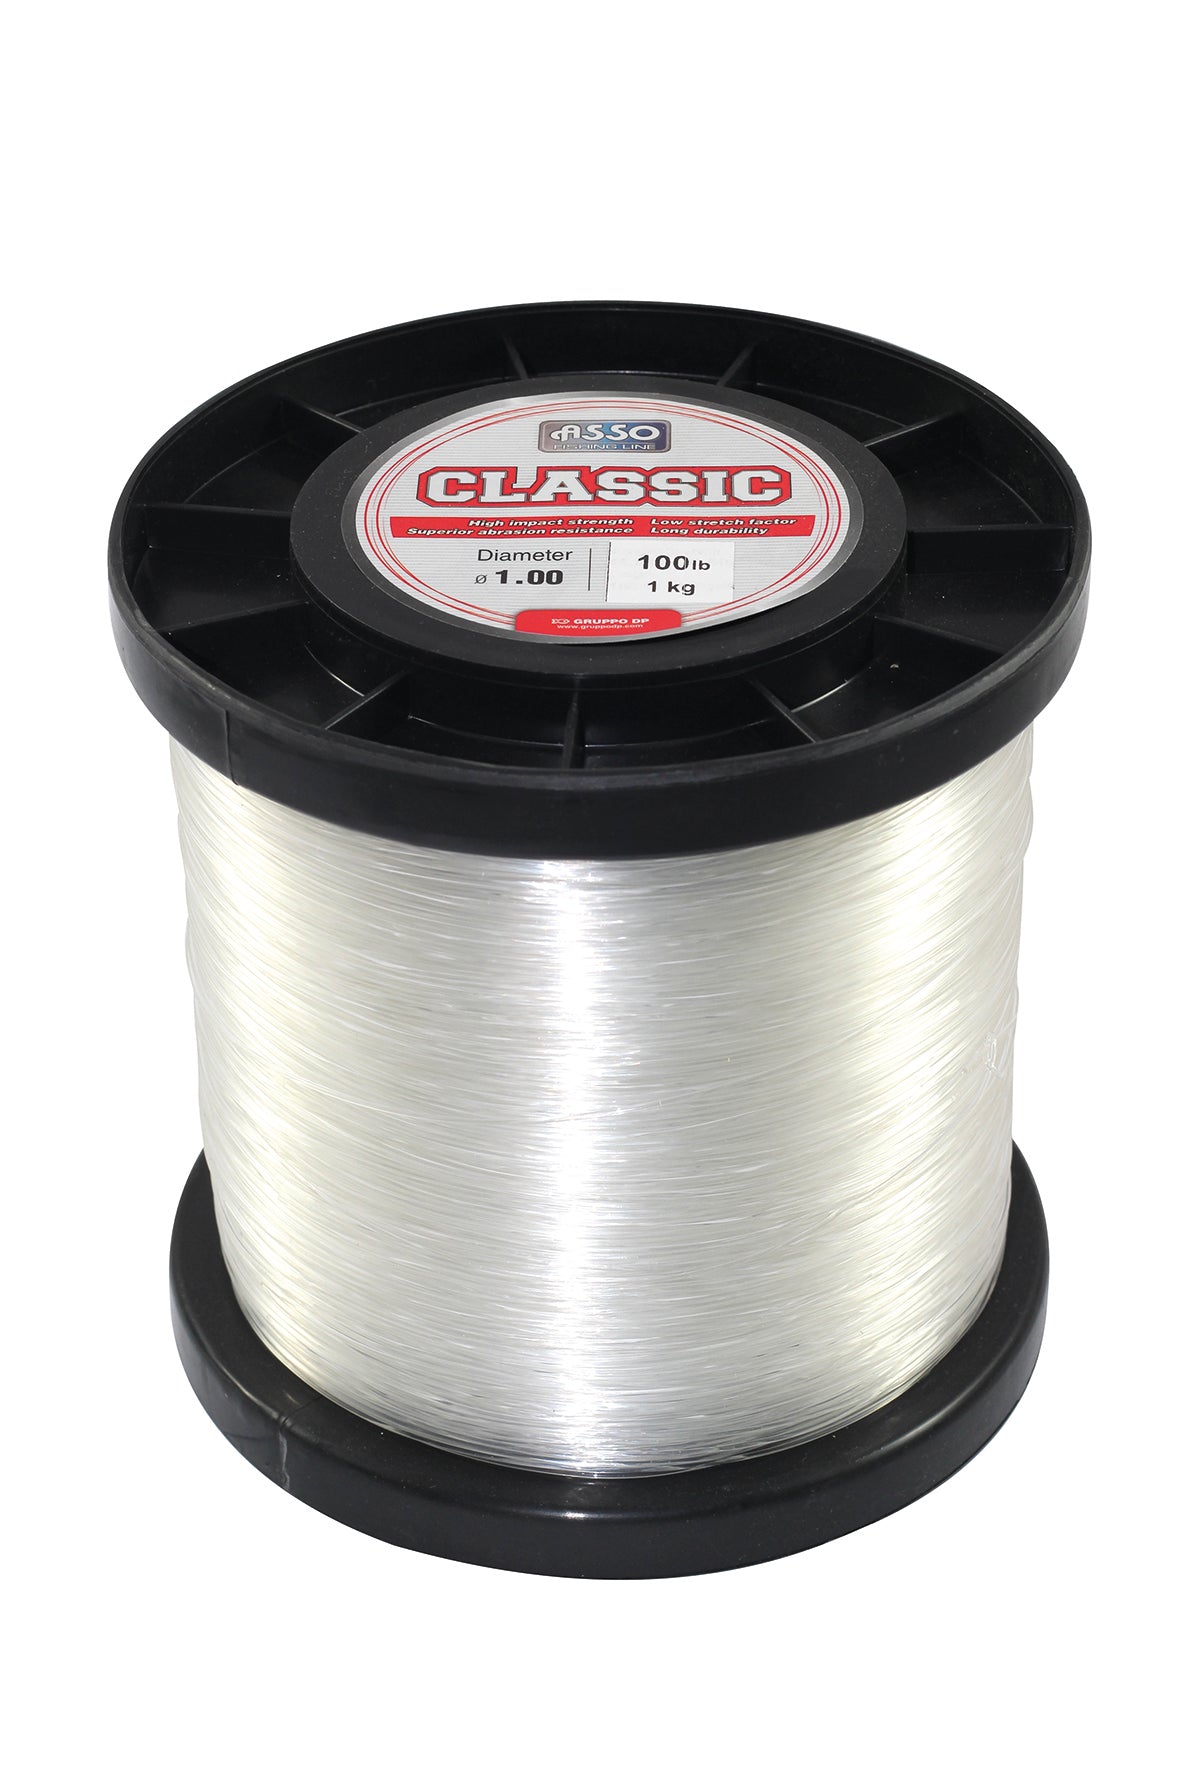 Buy Asso Classic 1KG Fishing Line at the best Prices – Asso Fishing Line UK